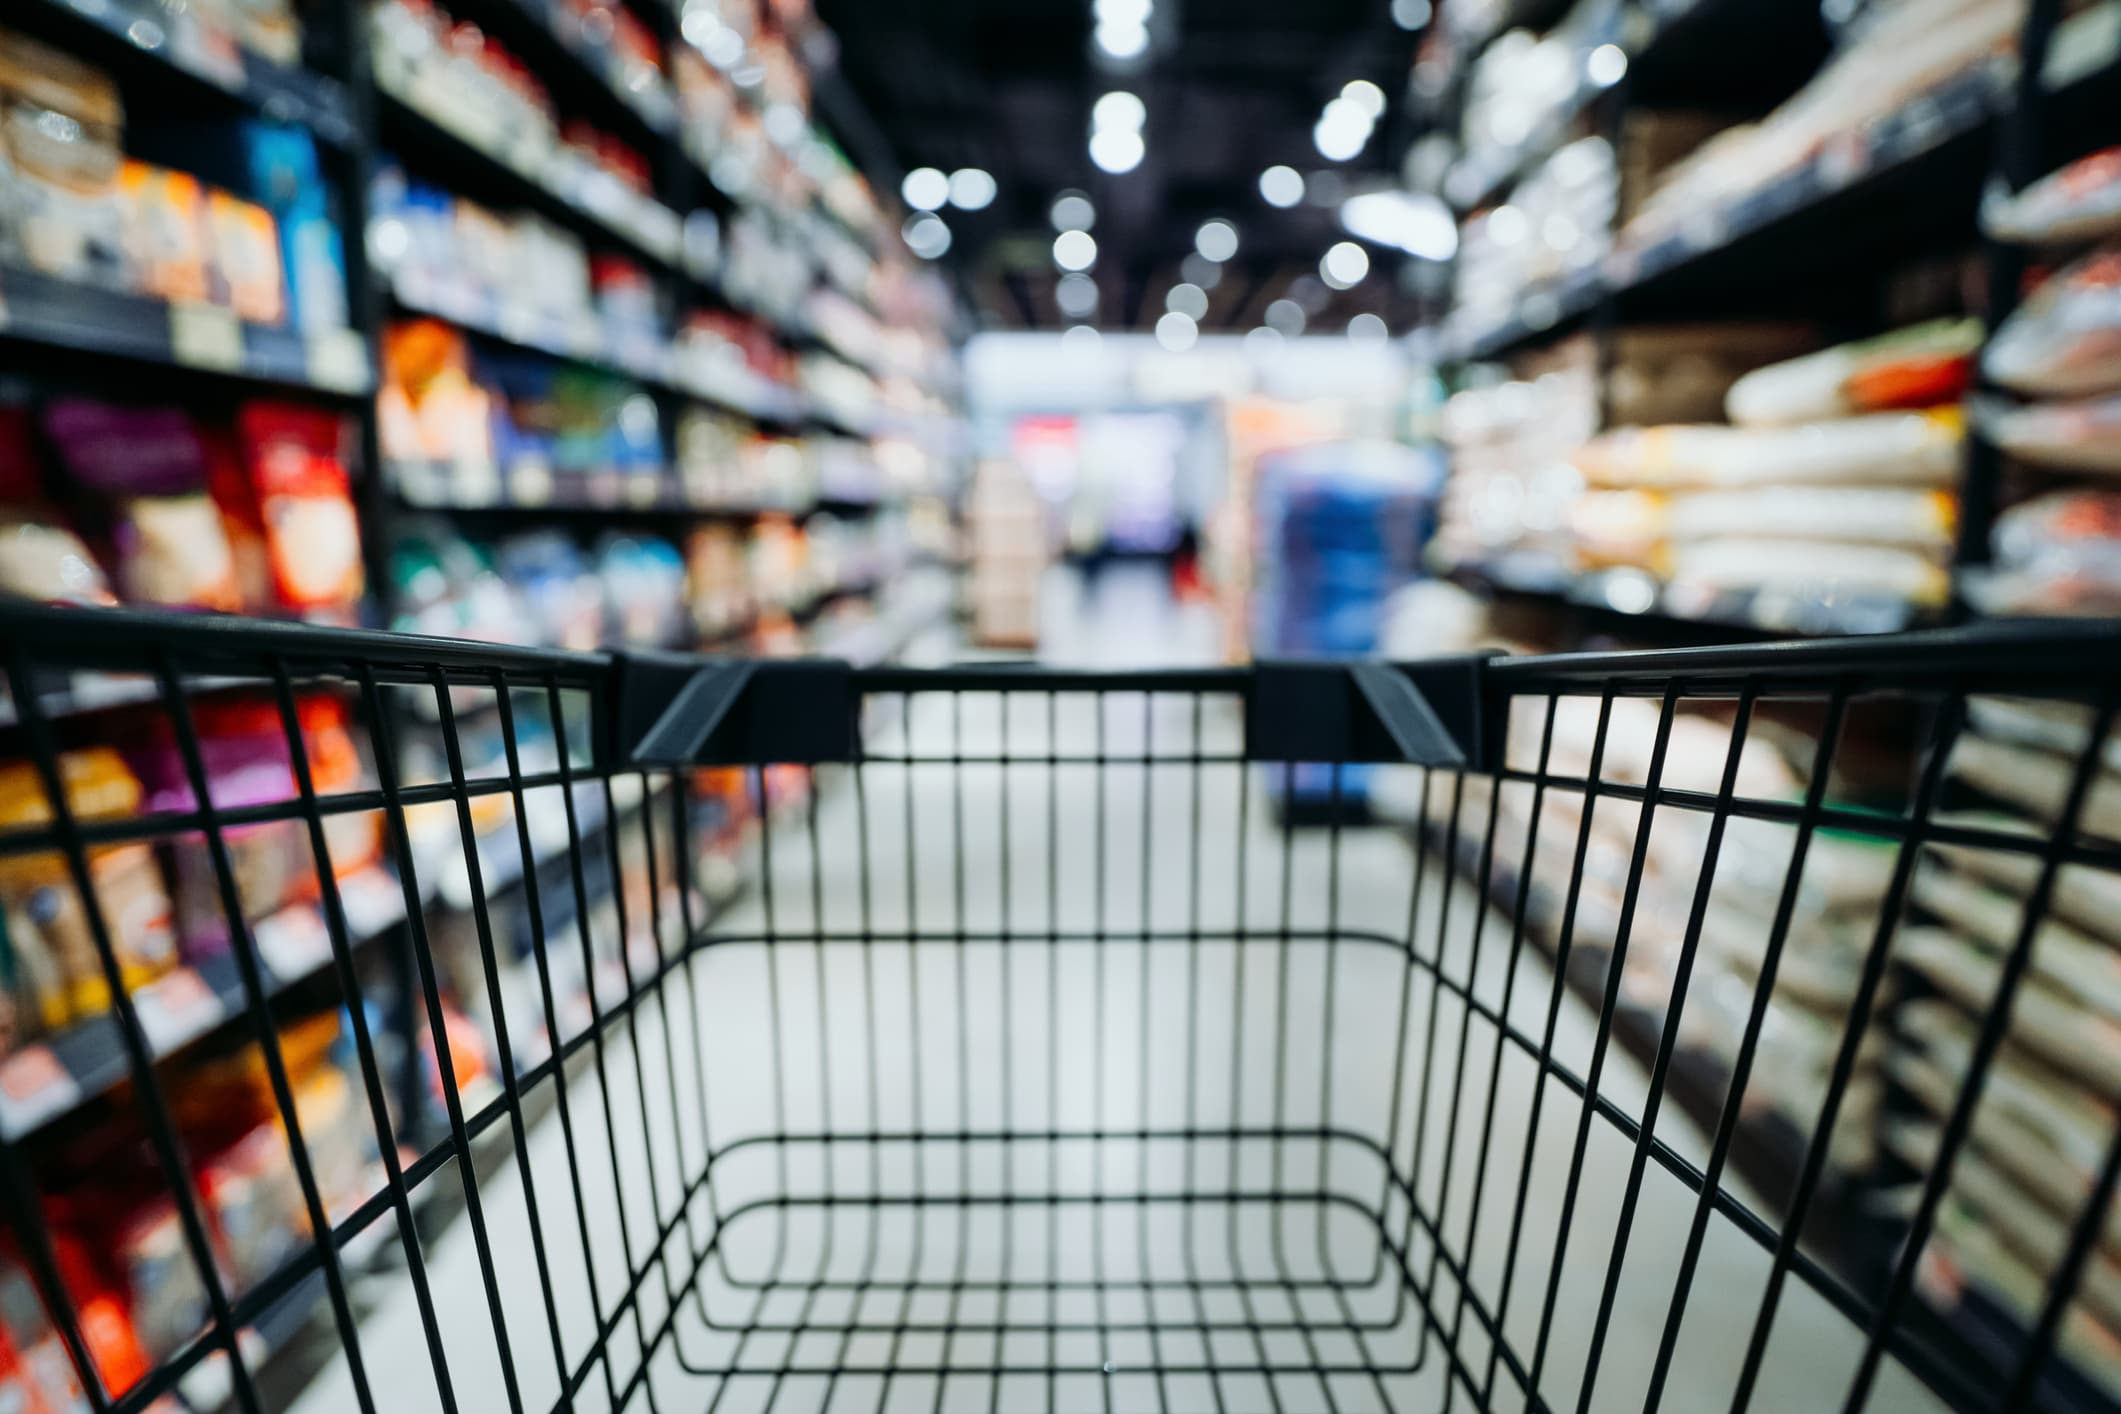 Should I Disinfect My Groceries? Advice About Grocery Shopping